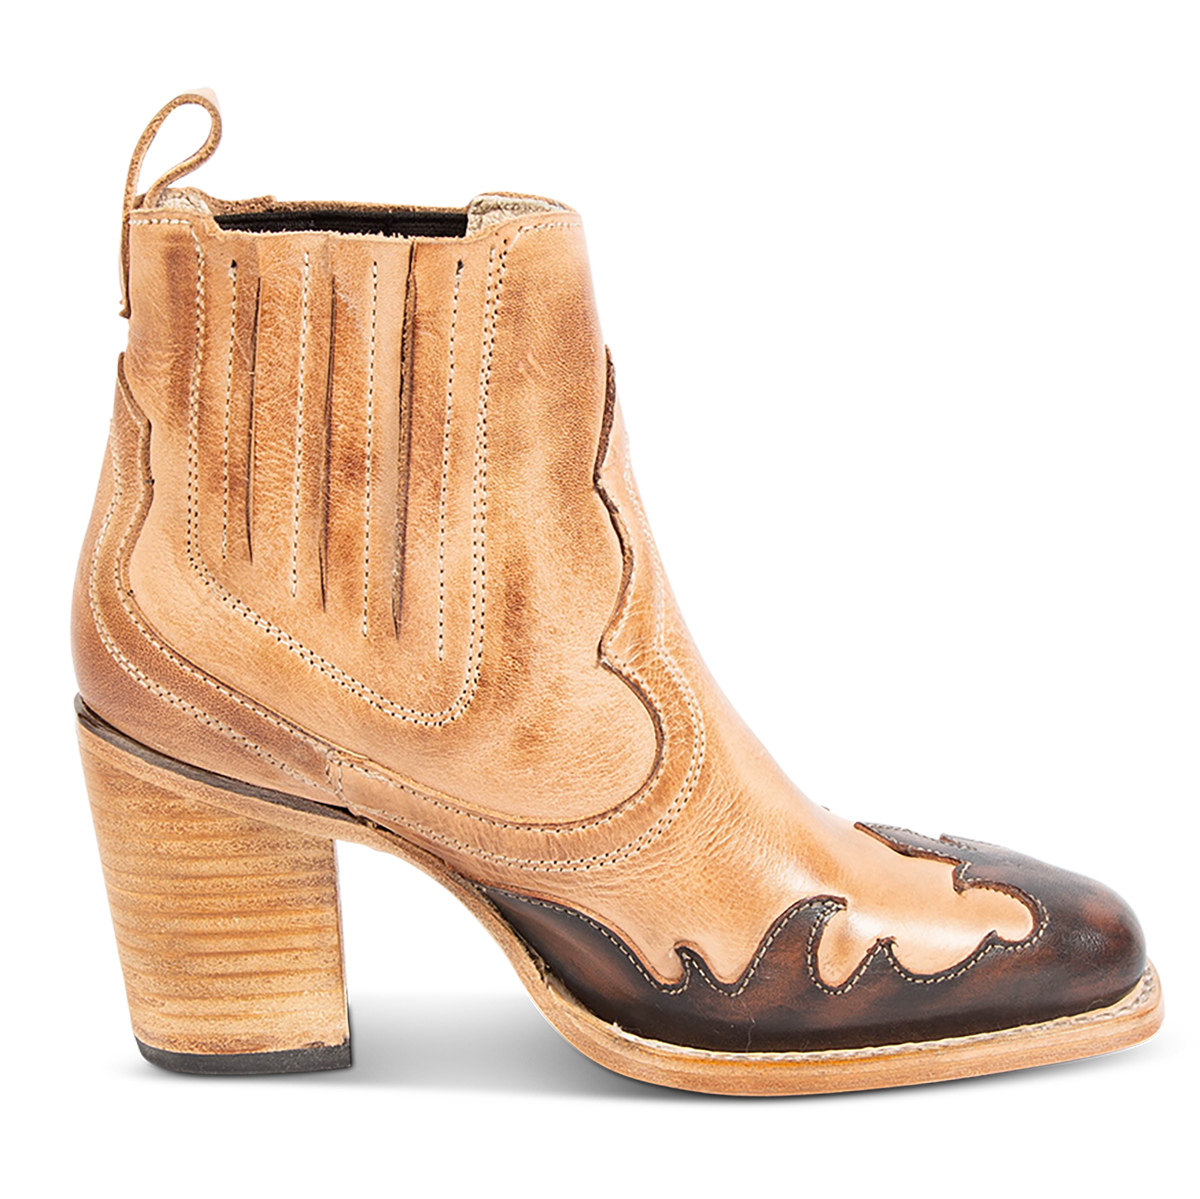 FREEBIRD women's Paula beige multi contrast leather overlay bootie with gore detailing, stacked heel and heel leather pull tab